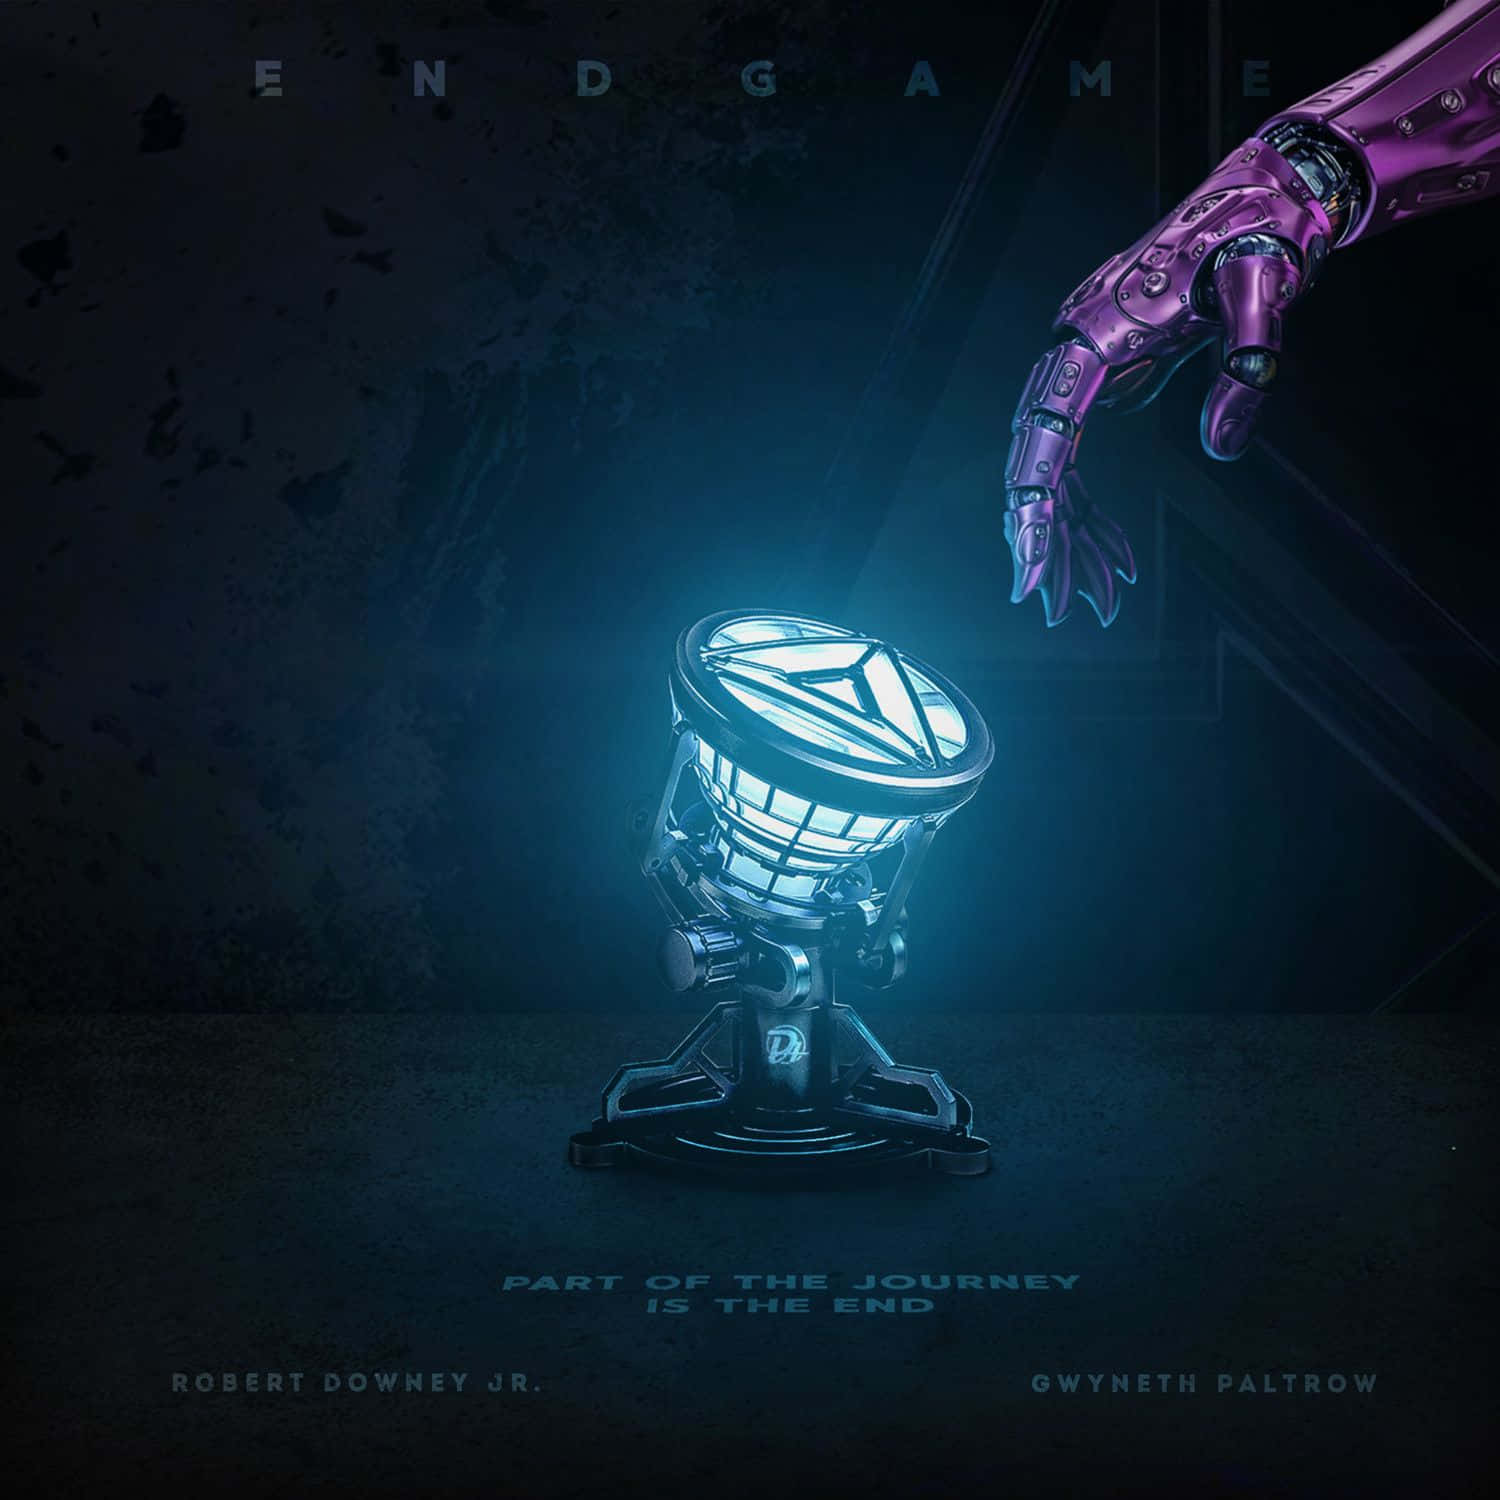 The Endgame Poster With A Hand Reaching Out To A Hand